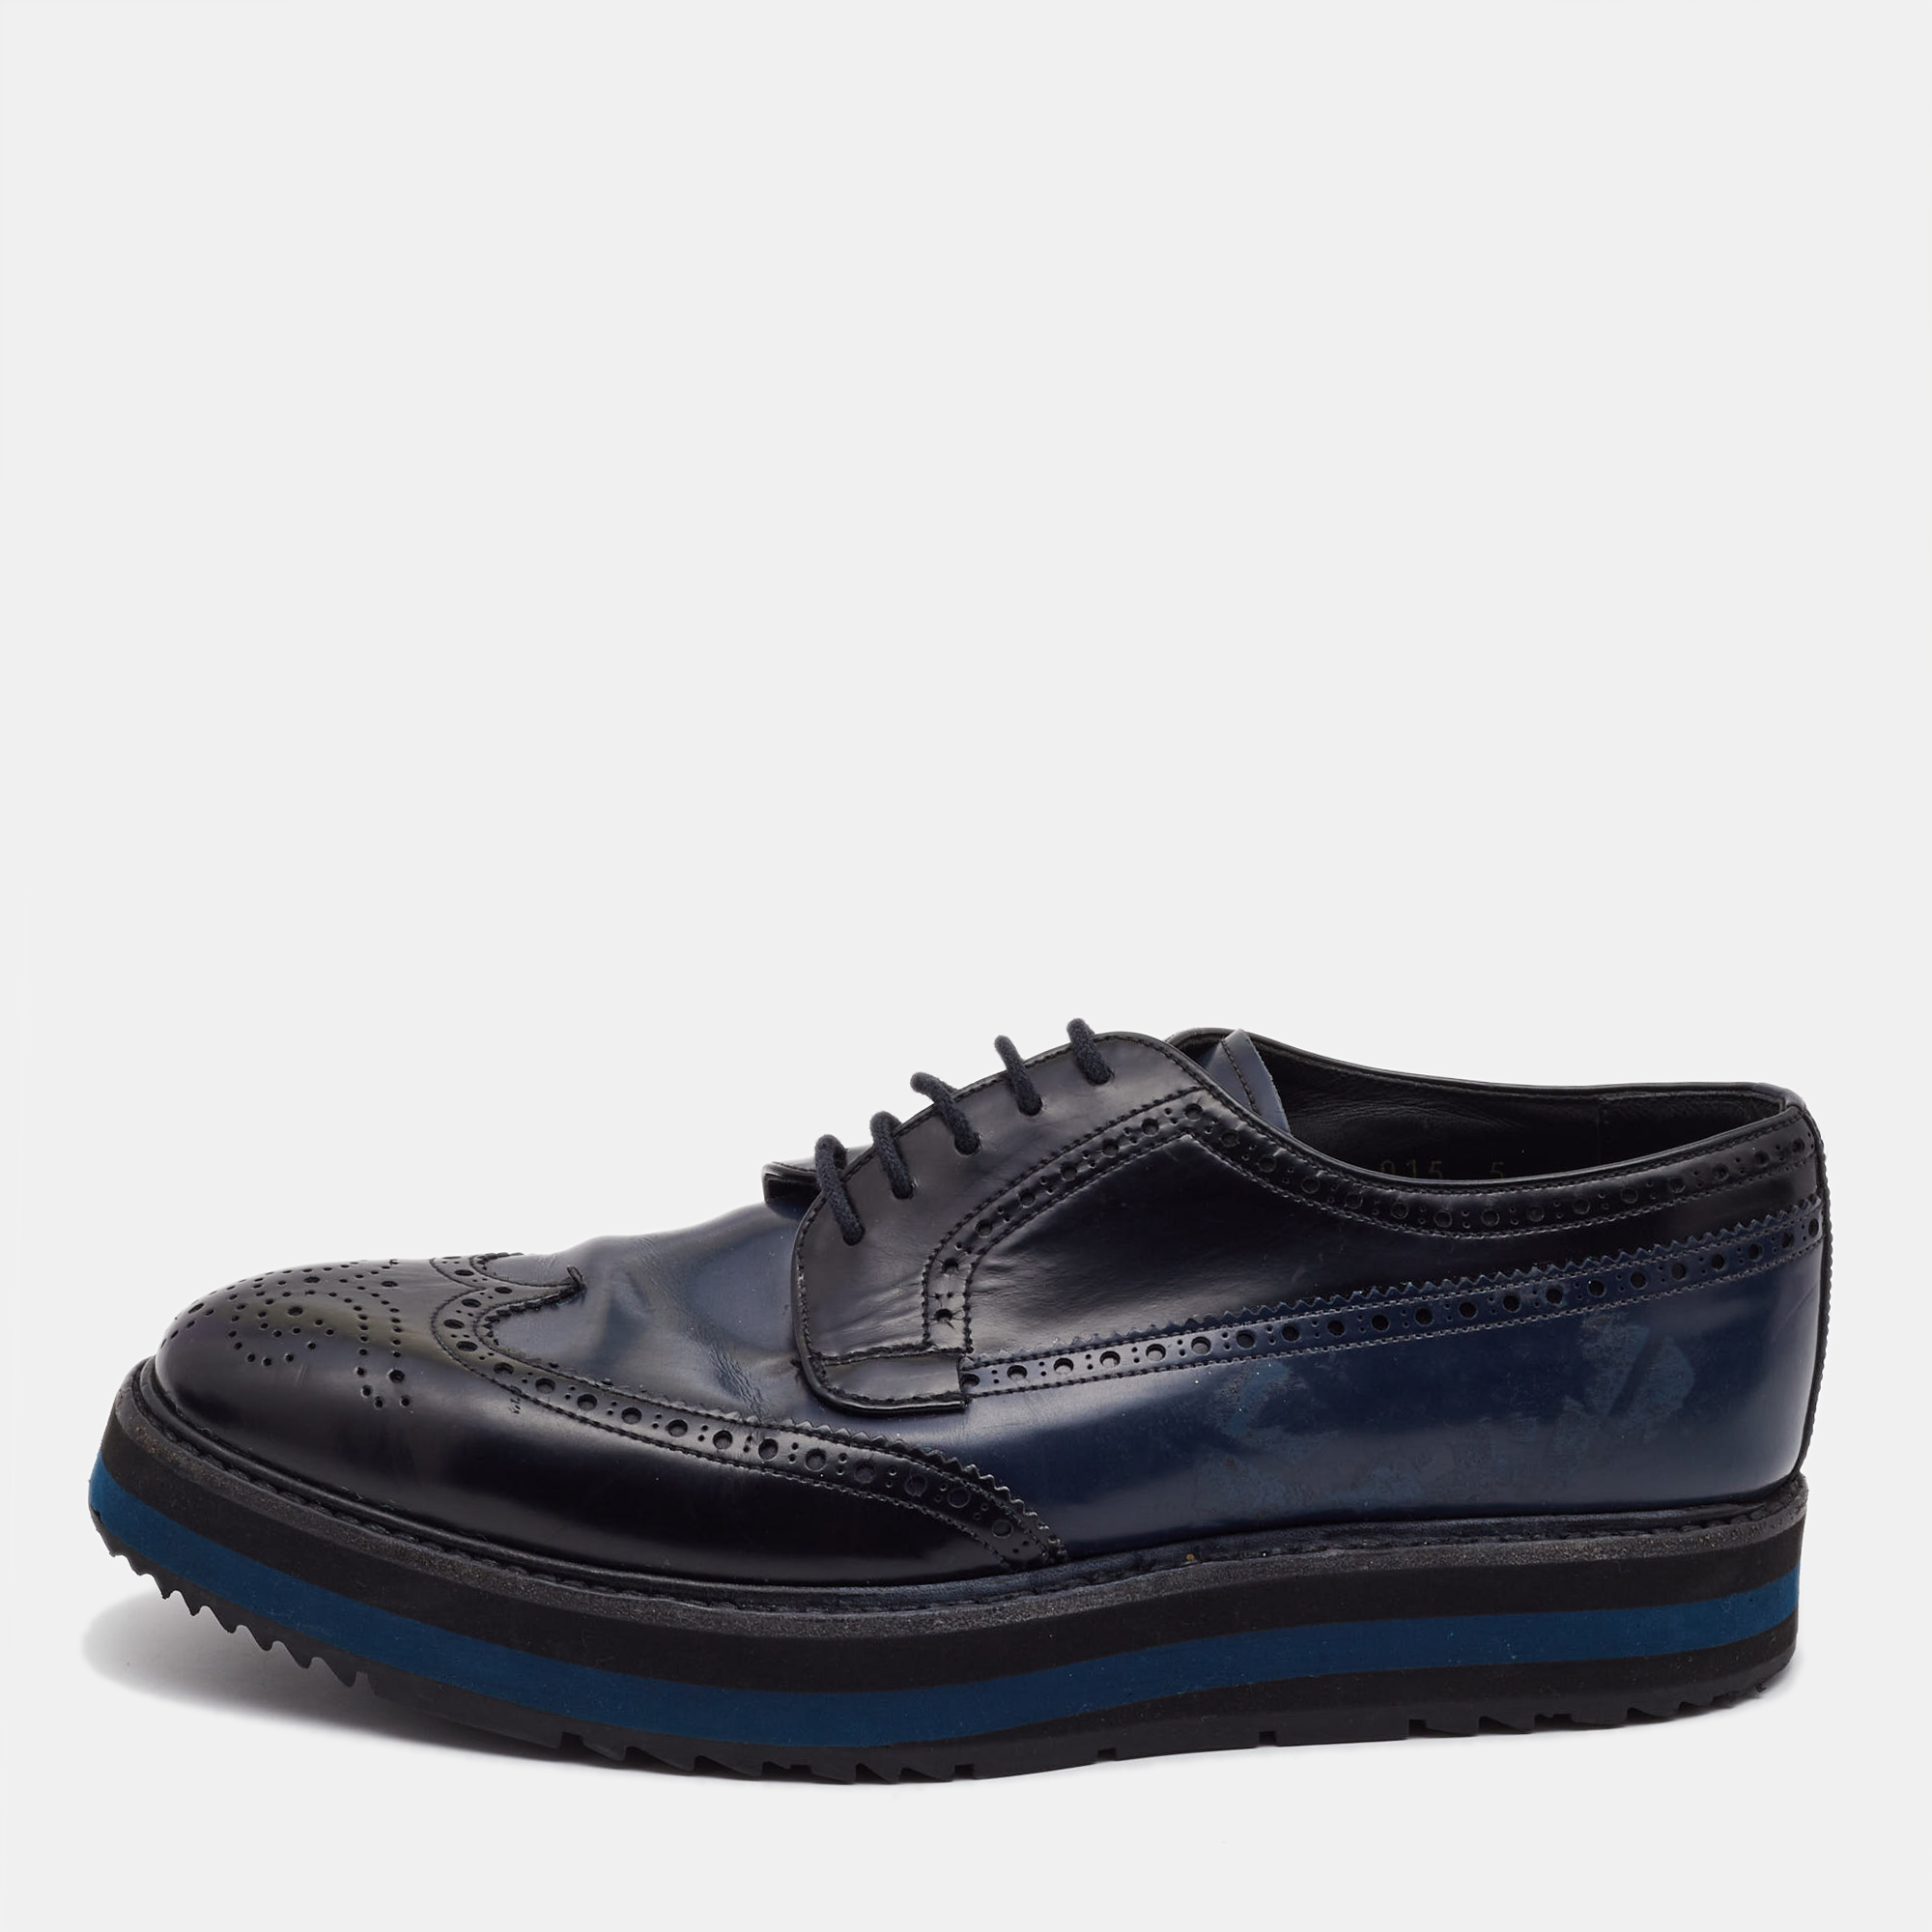 

Prada Black/Navy Blue Patent Leather Brogue Oxford Sneakers Size 39